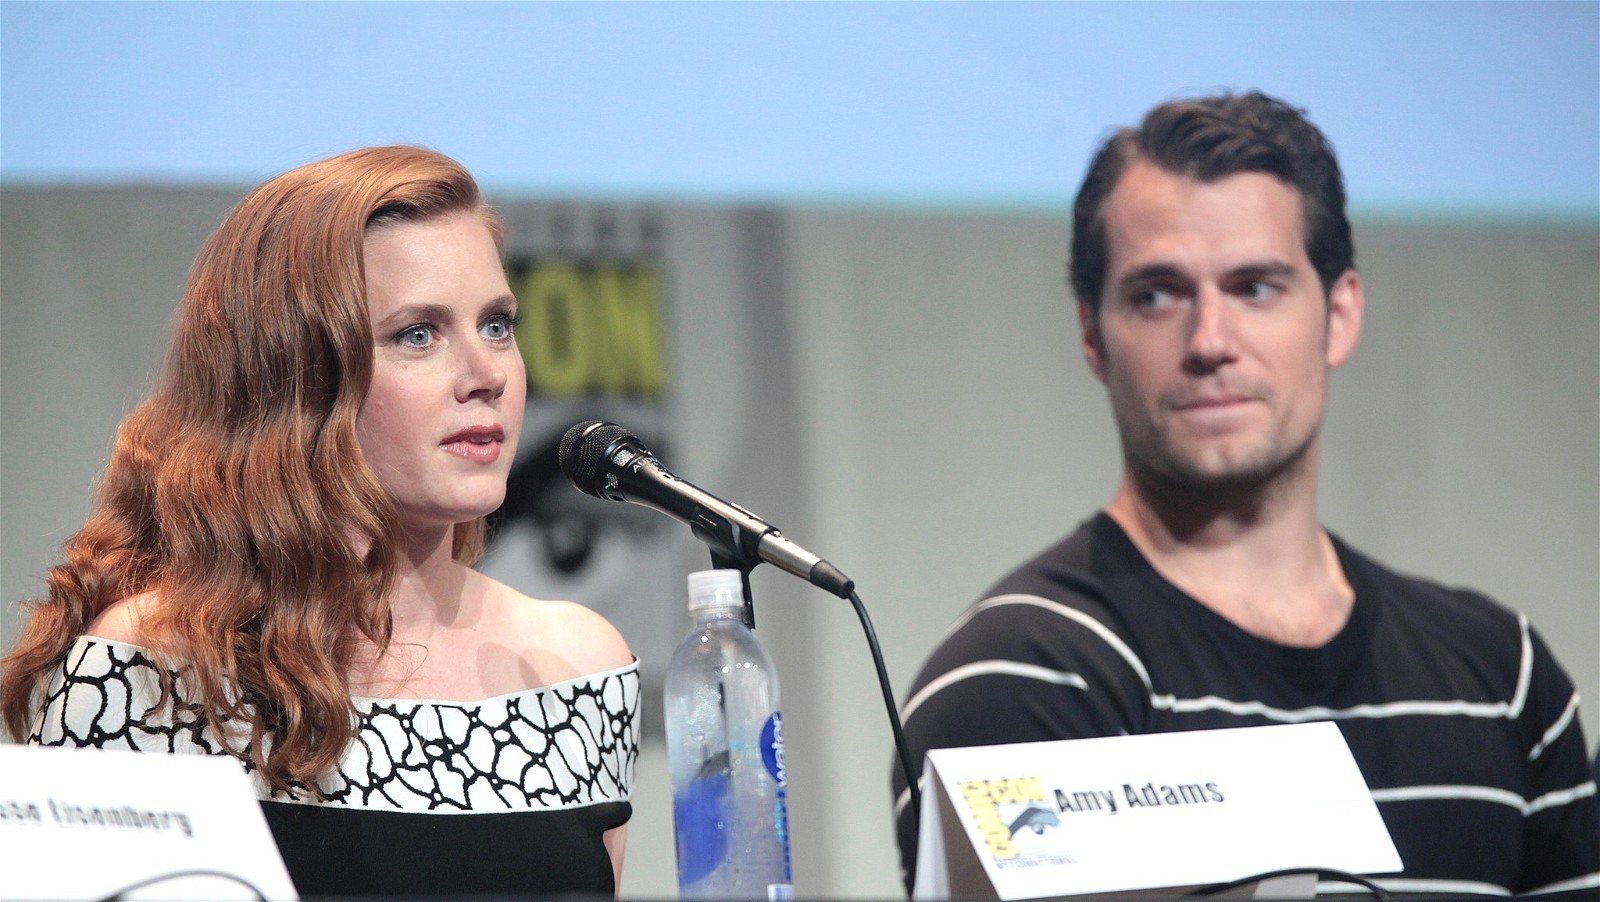 Henry Cavill and Amy Adams at the SDCC 2015.